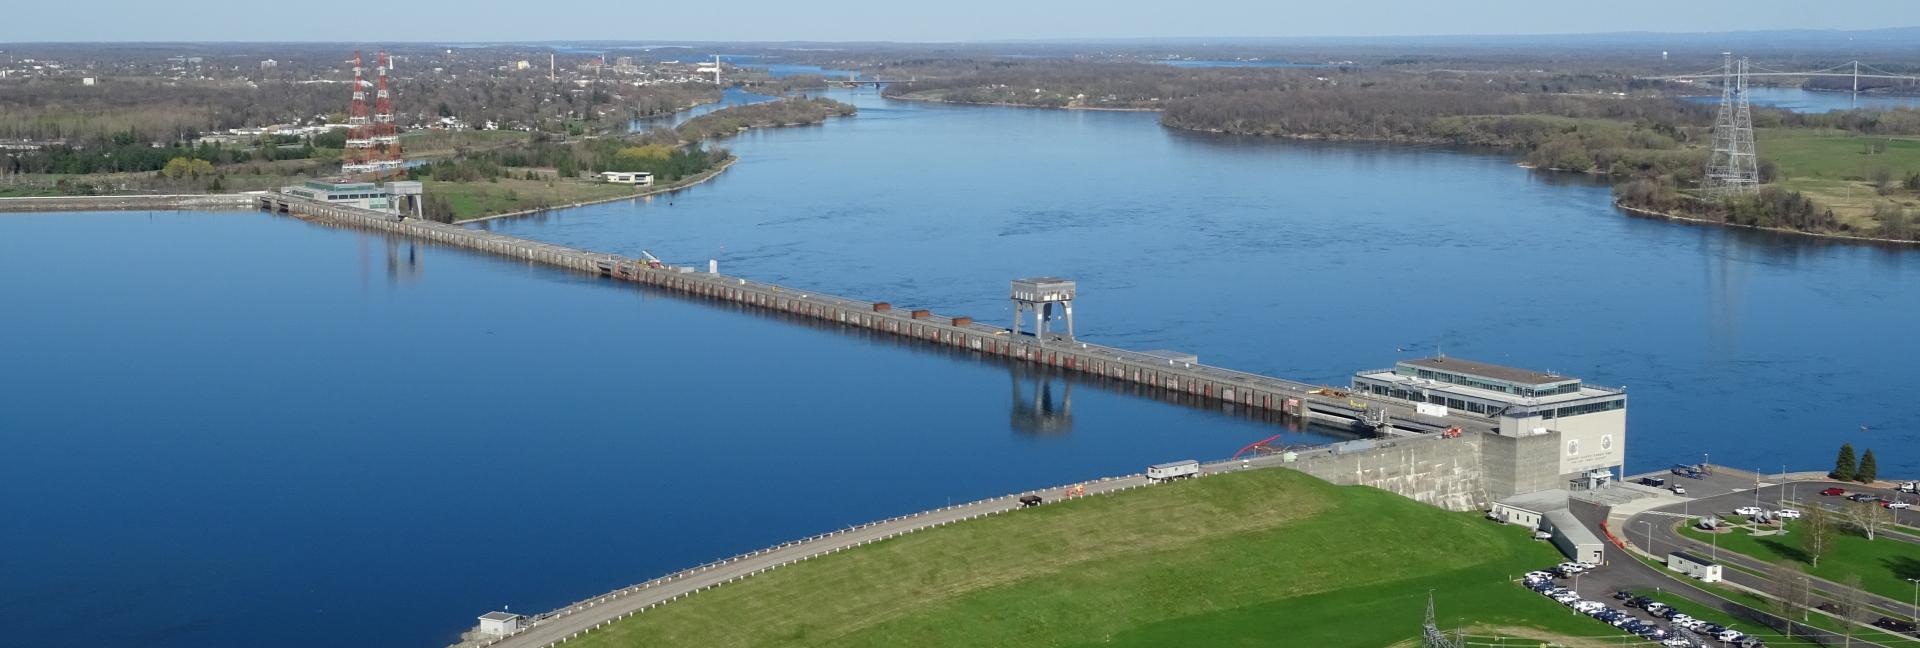 Drone shot of Moses-Saunders Dam